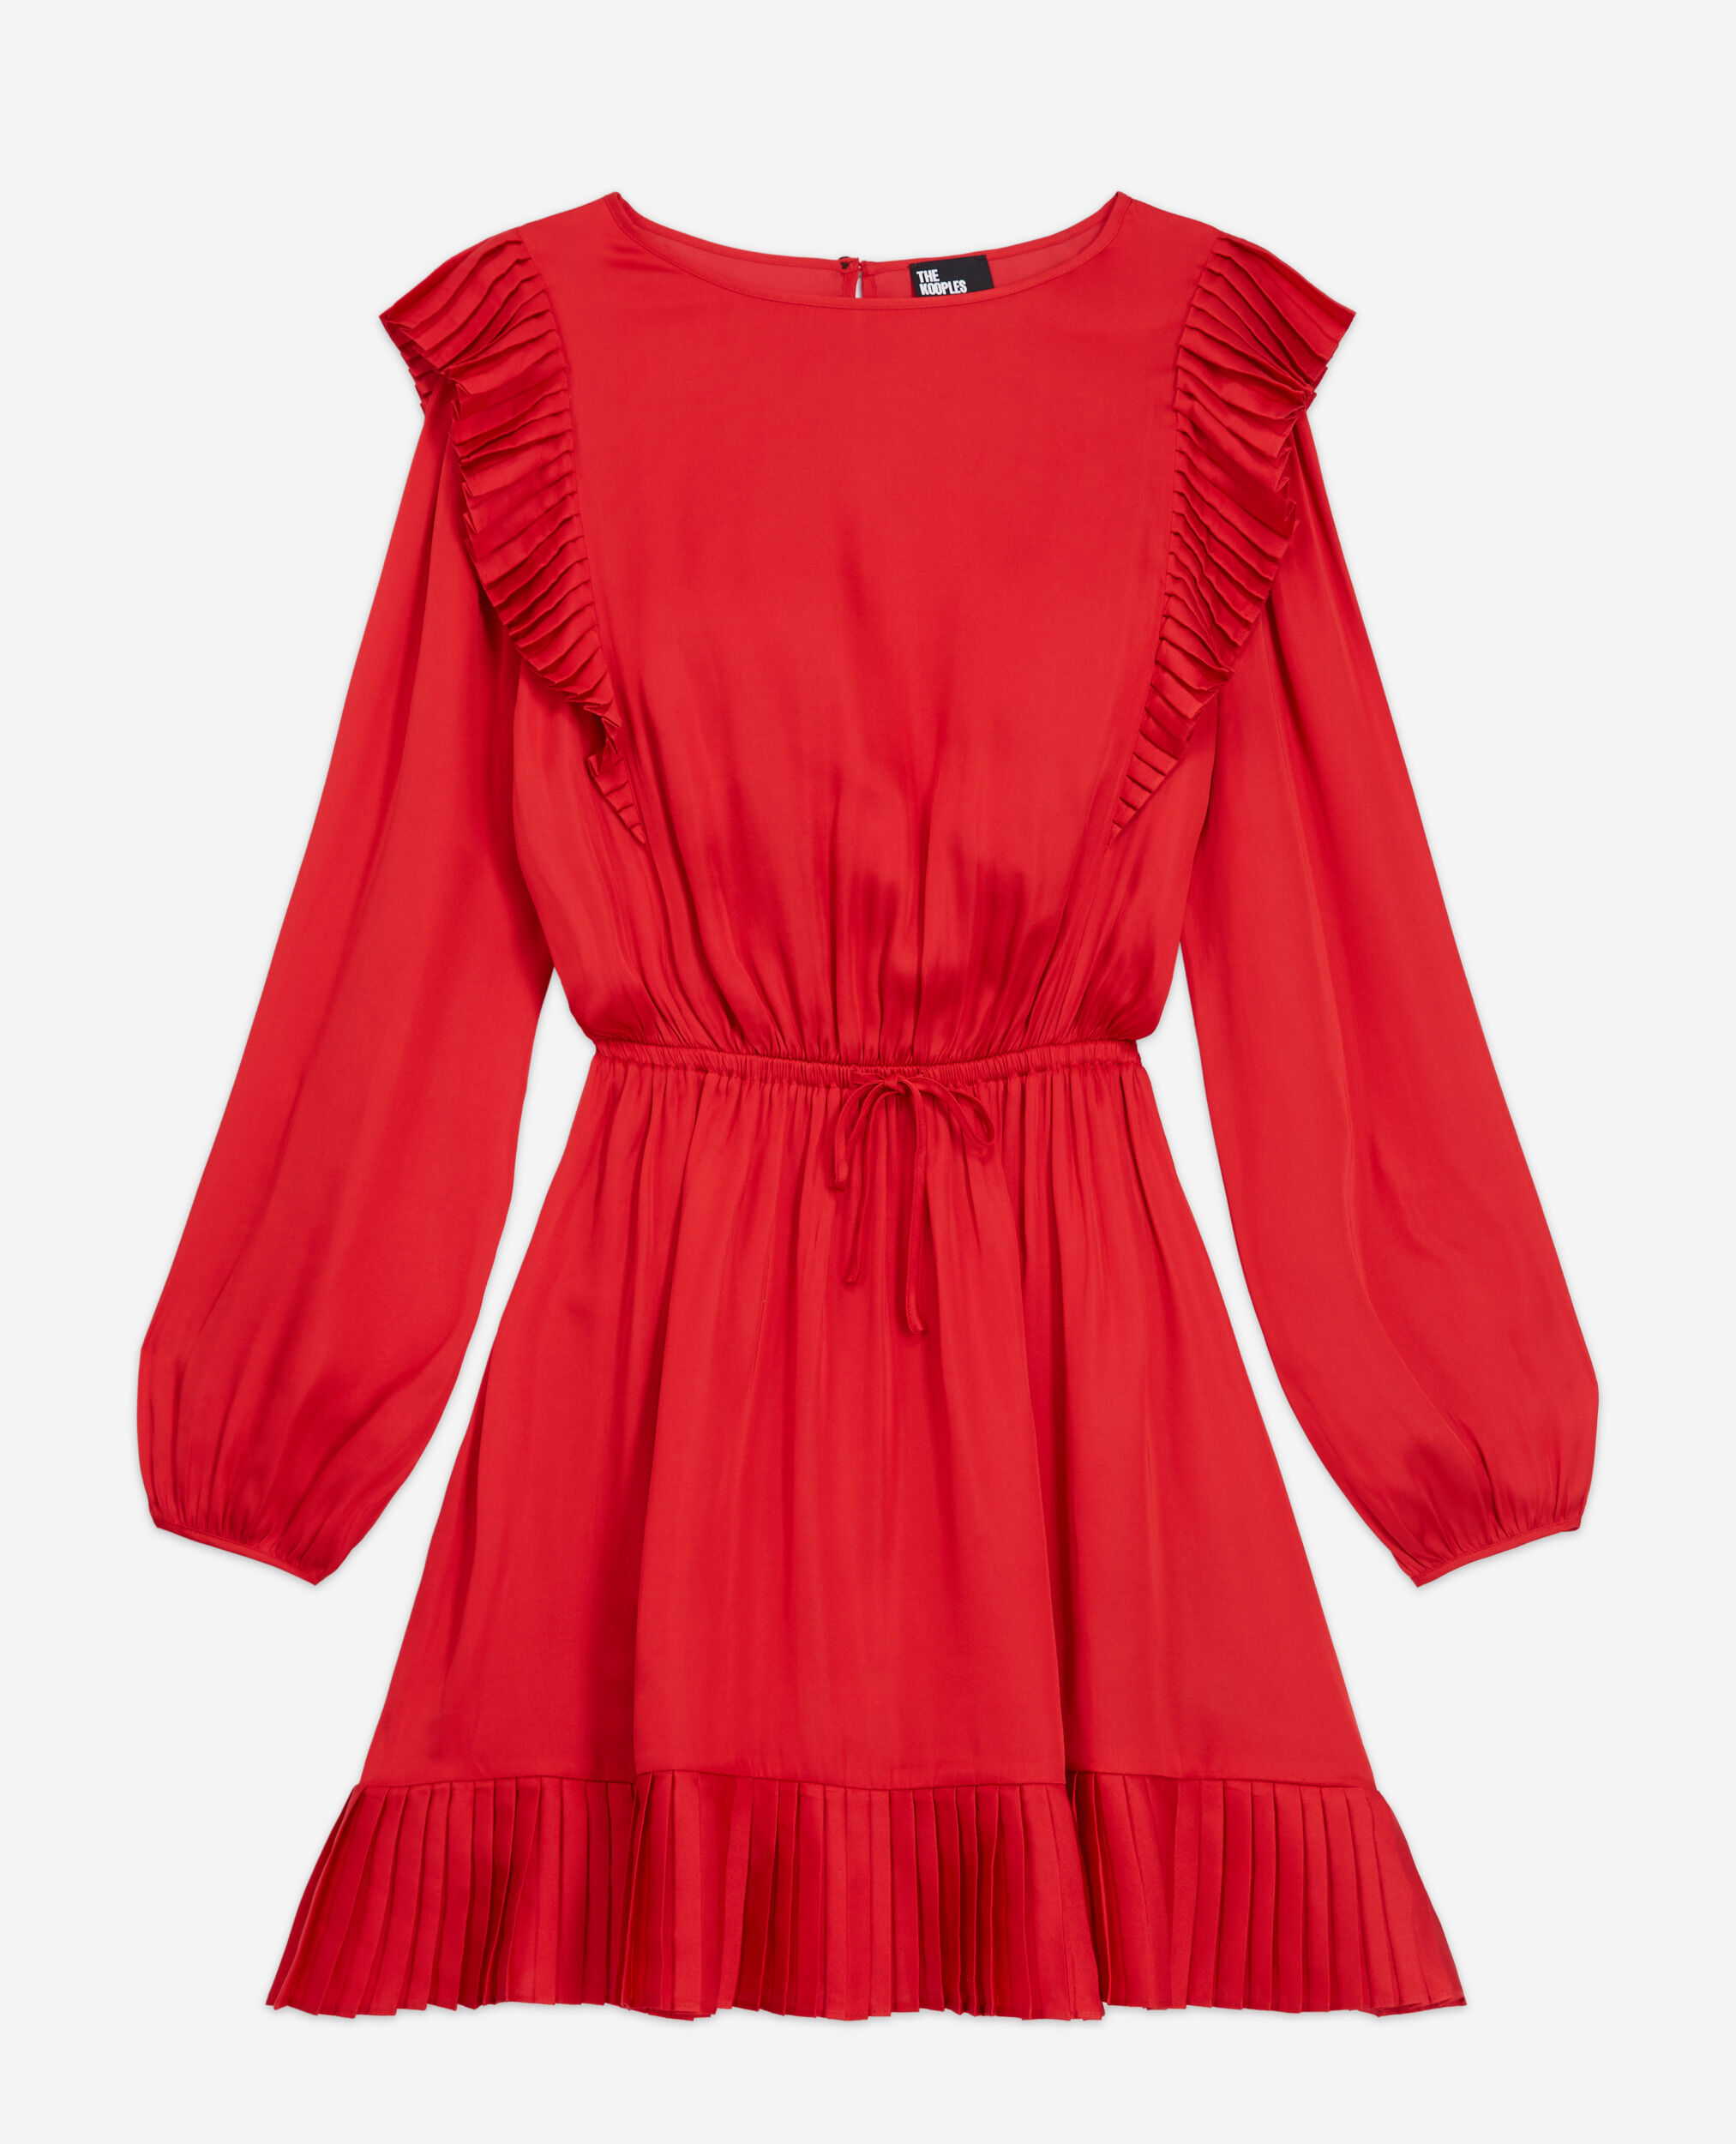 Kurzes Kleid rot, TANGO RED, hi-res image number null